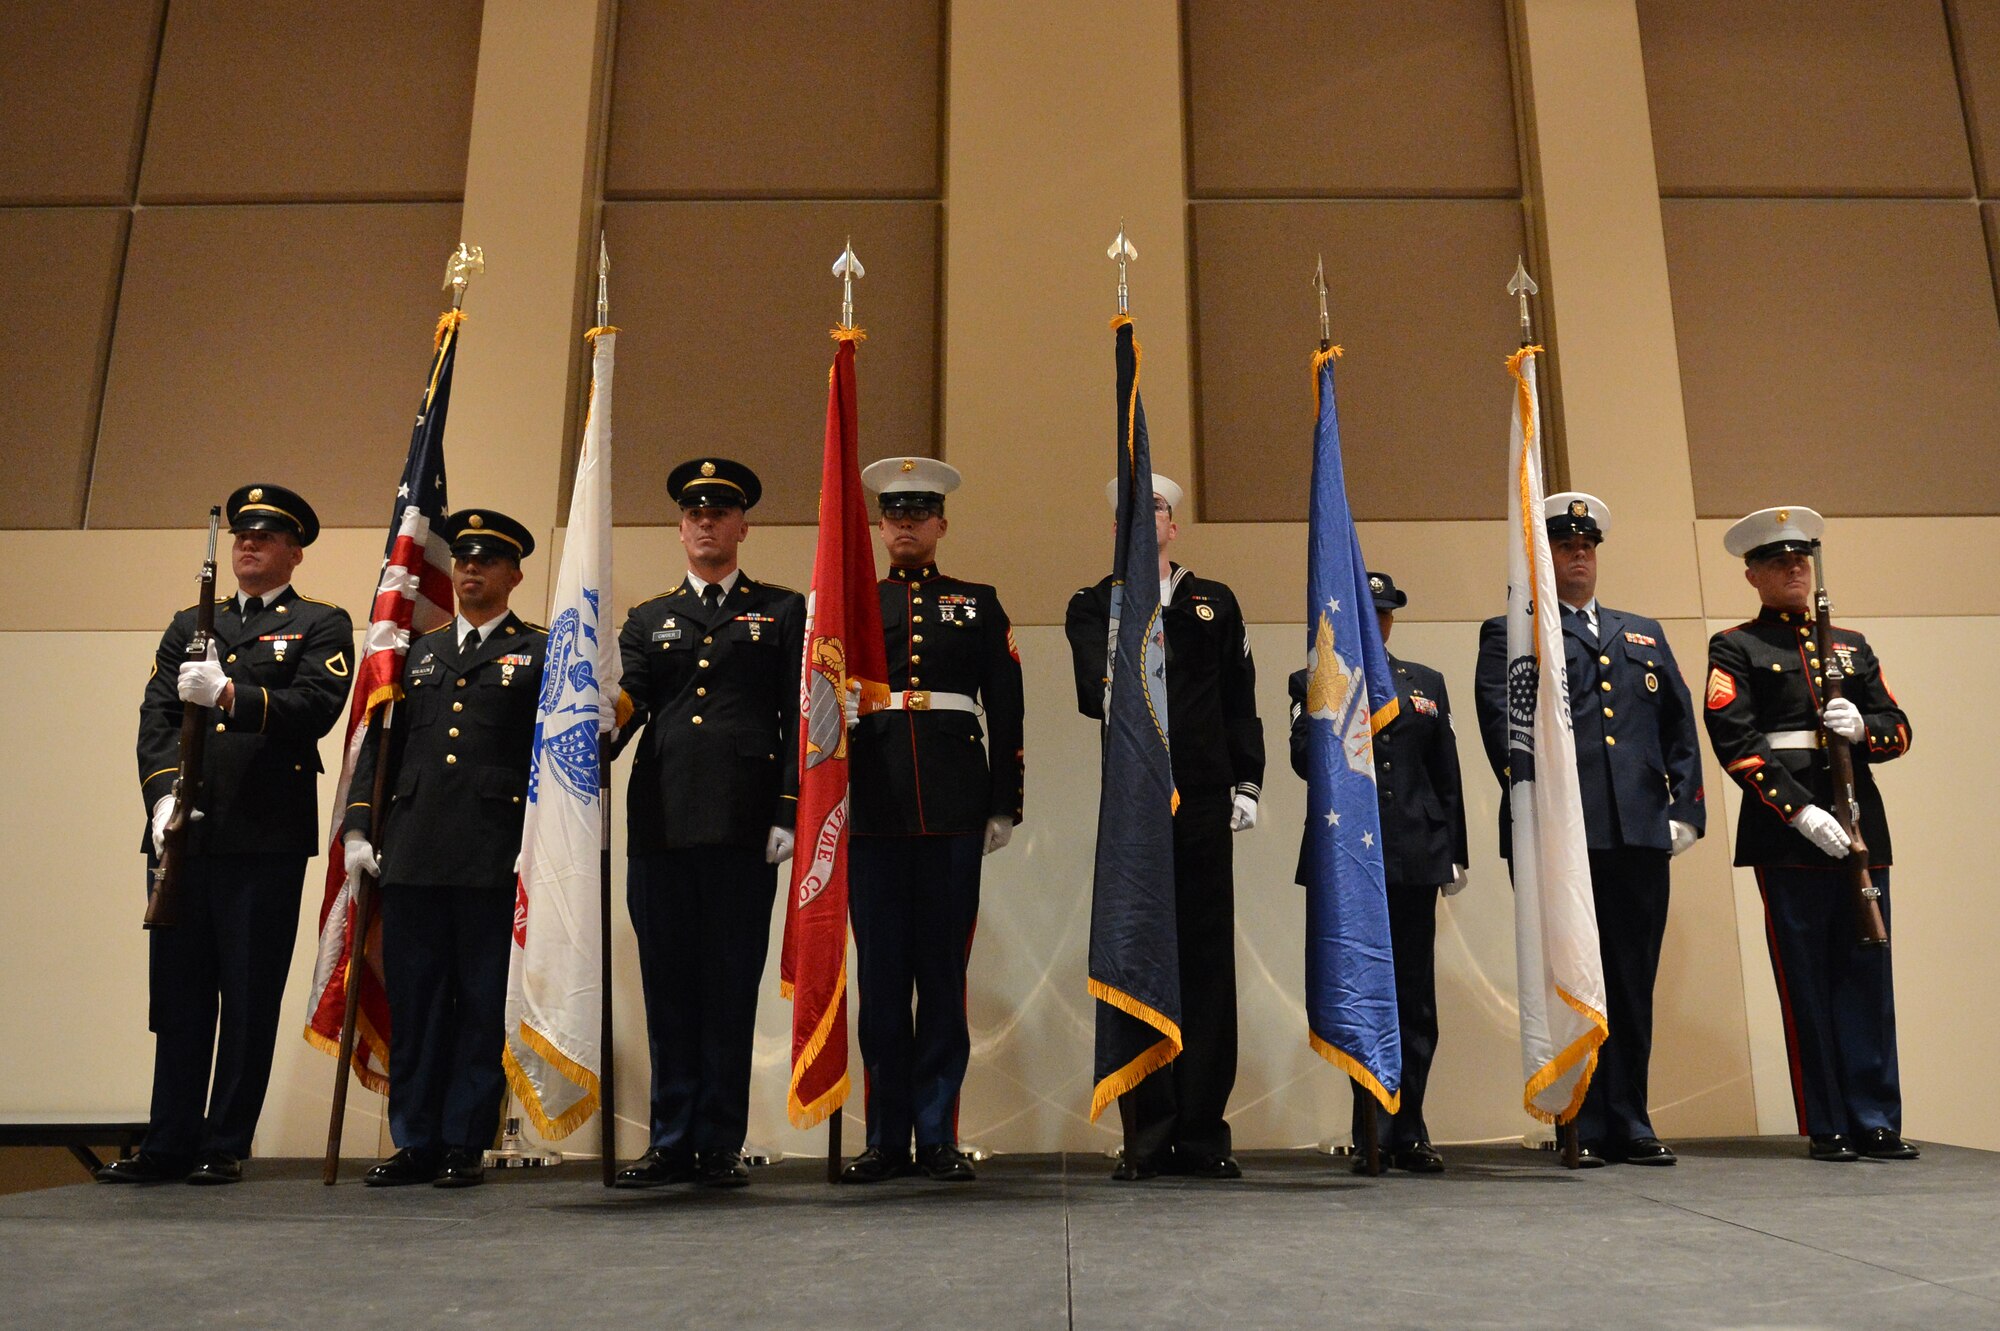 Members of the Aerospace Data Facility-Colorado Joint Color Guard post colors during the Veterans Day ceremony at the Leadership Development Center Nov. 13, 2015, on Buckley Air Force Base, Colo. The ceremony included a guest speaker and a flag-folding ceremony performed by the ADF-C joint color guard. (U.S. Air Force photo by Staff Sgt. Darren Scott/Released)